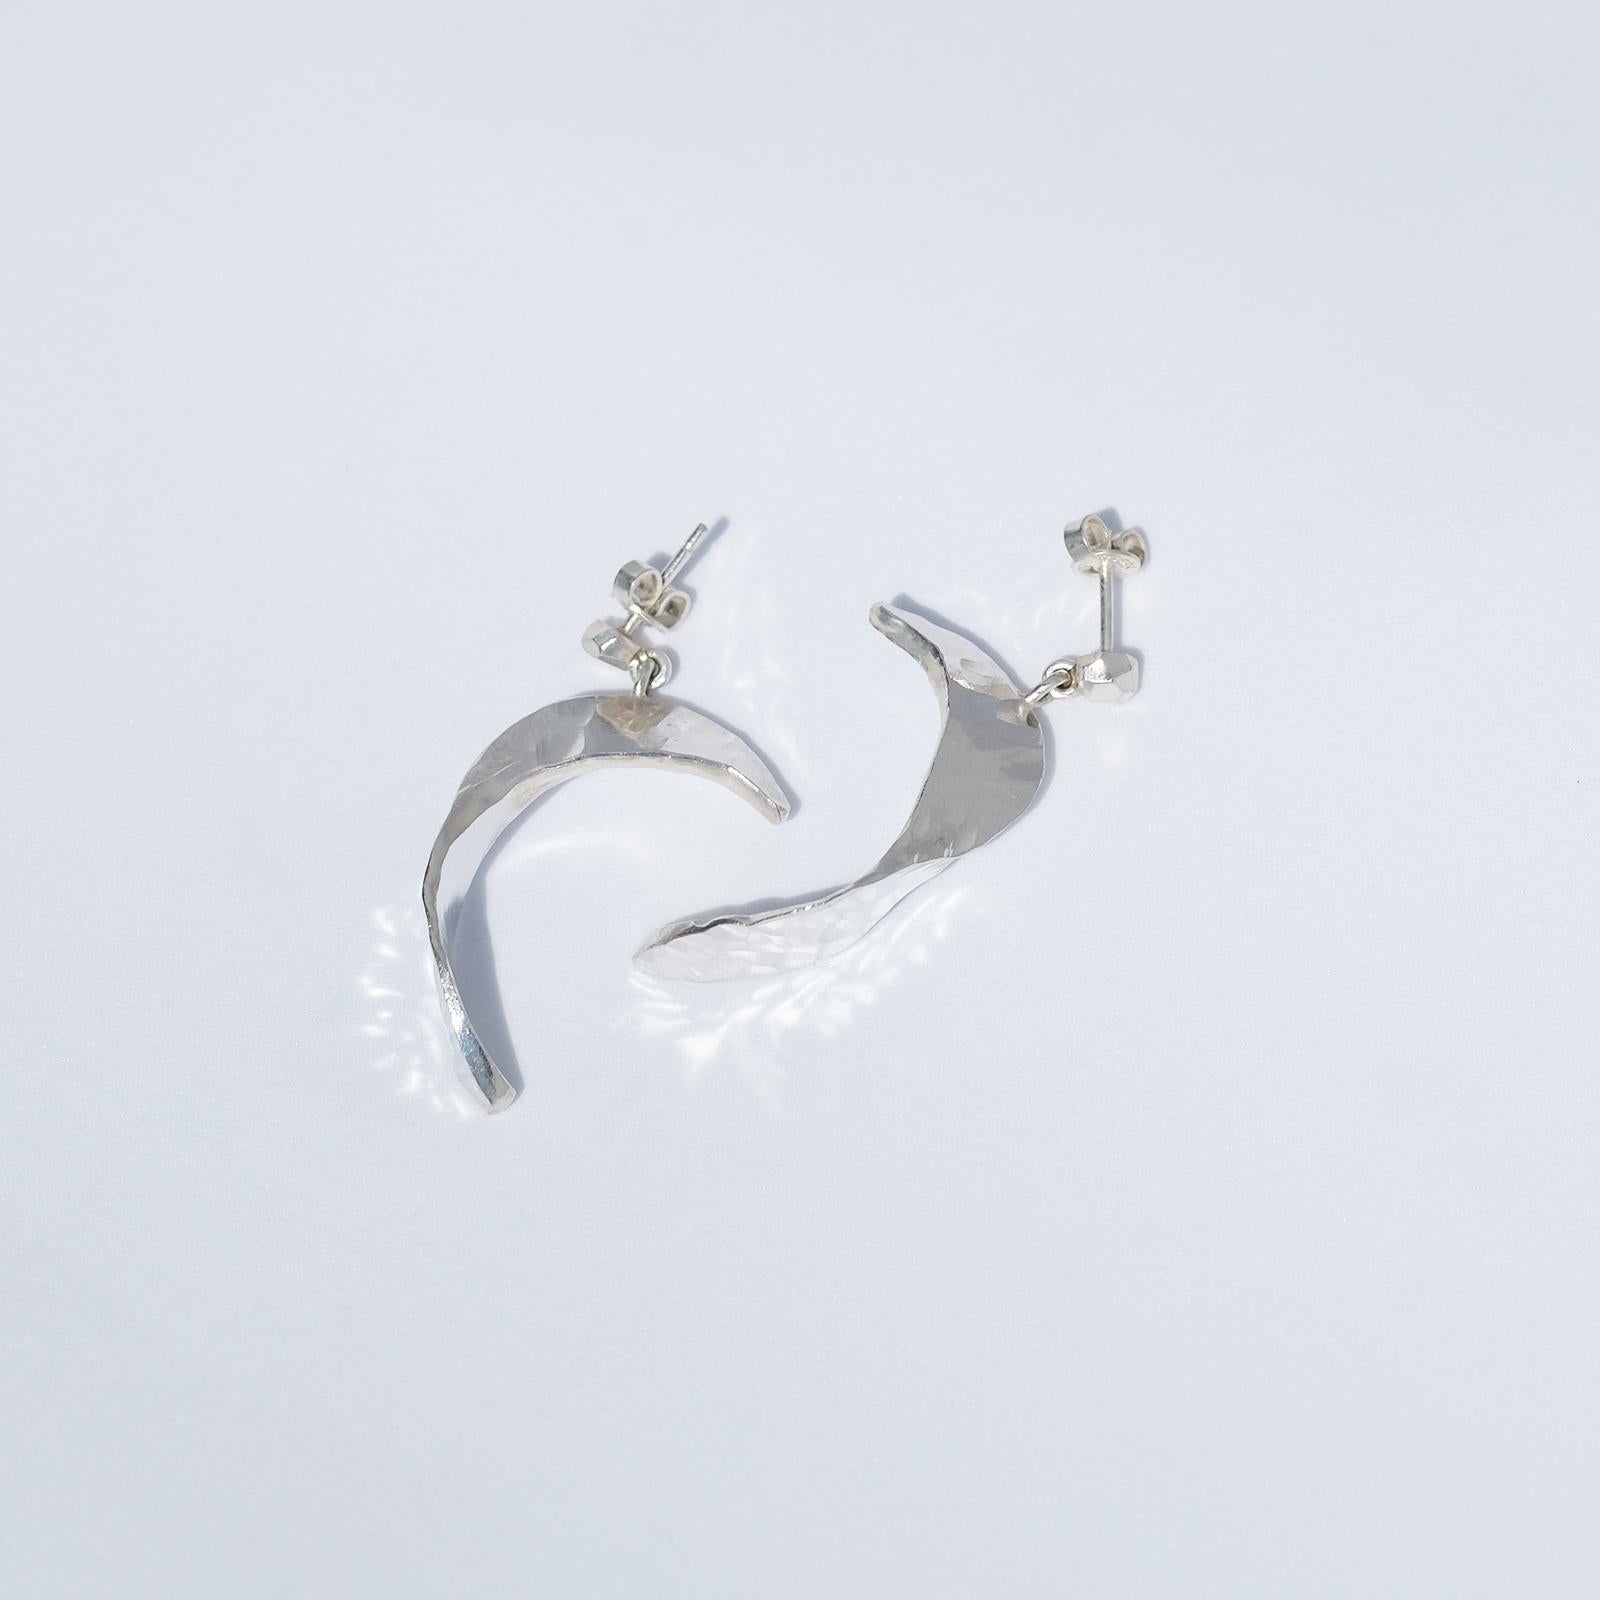 These sterling silver earrings are moon-shaped and they literally shine. The surface is hammered giving the earrings a handmade and genuine look.

The earrings work well for both special events and an everyday use. 

Have you seen the matching